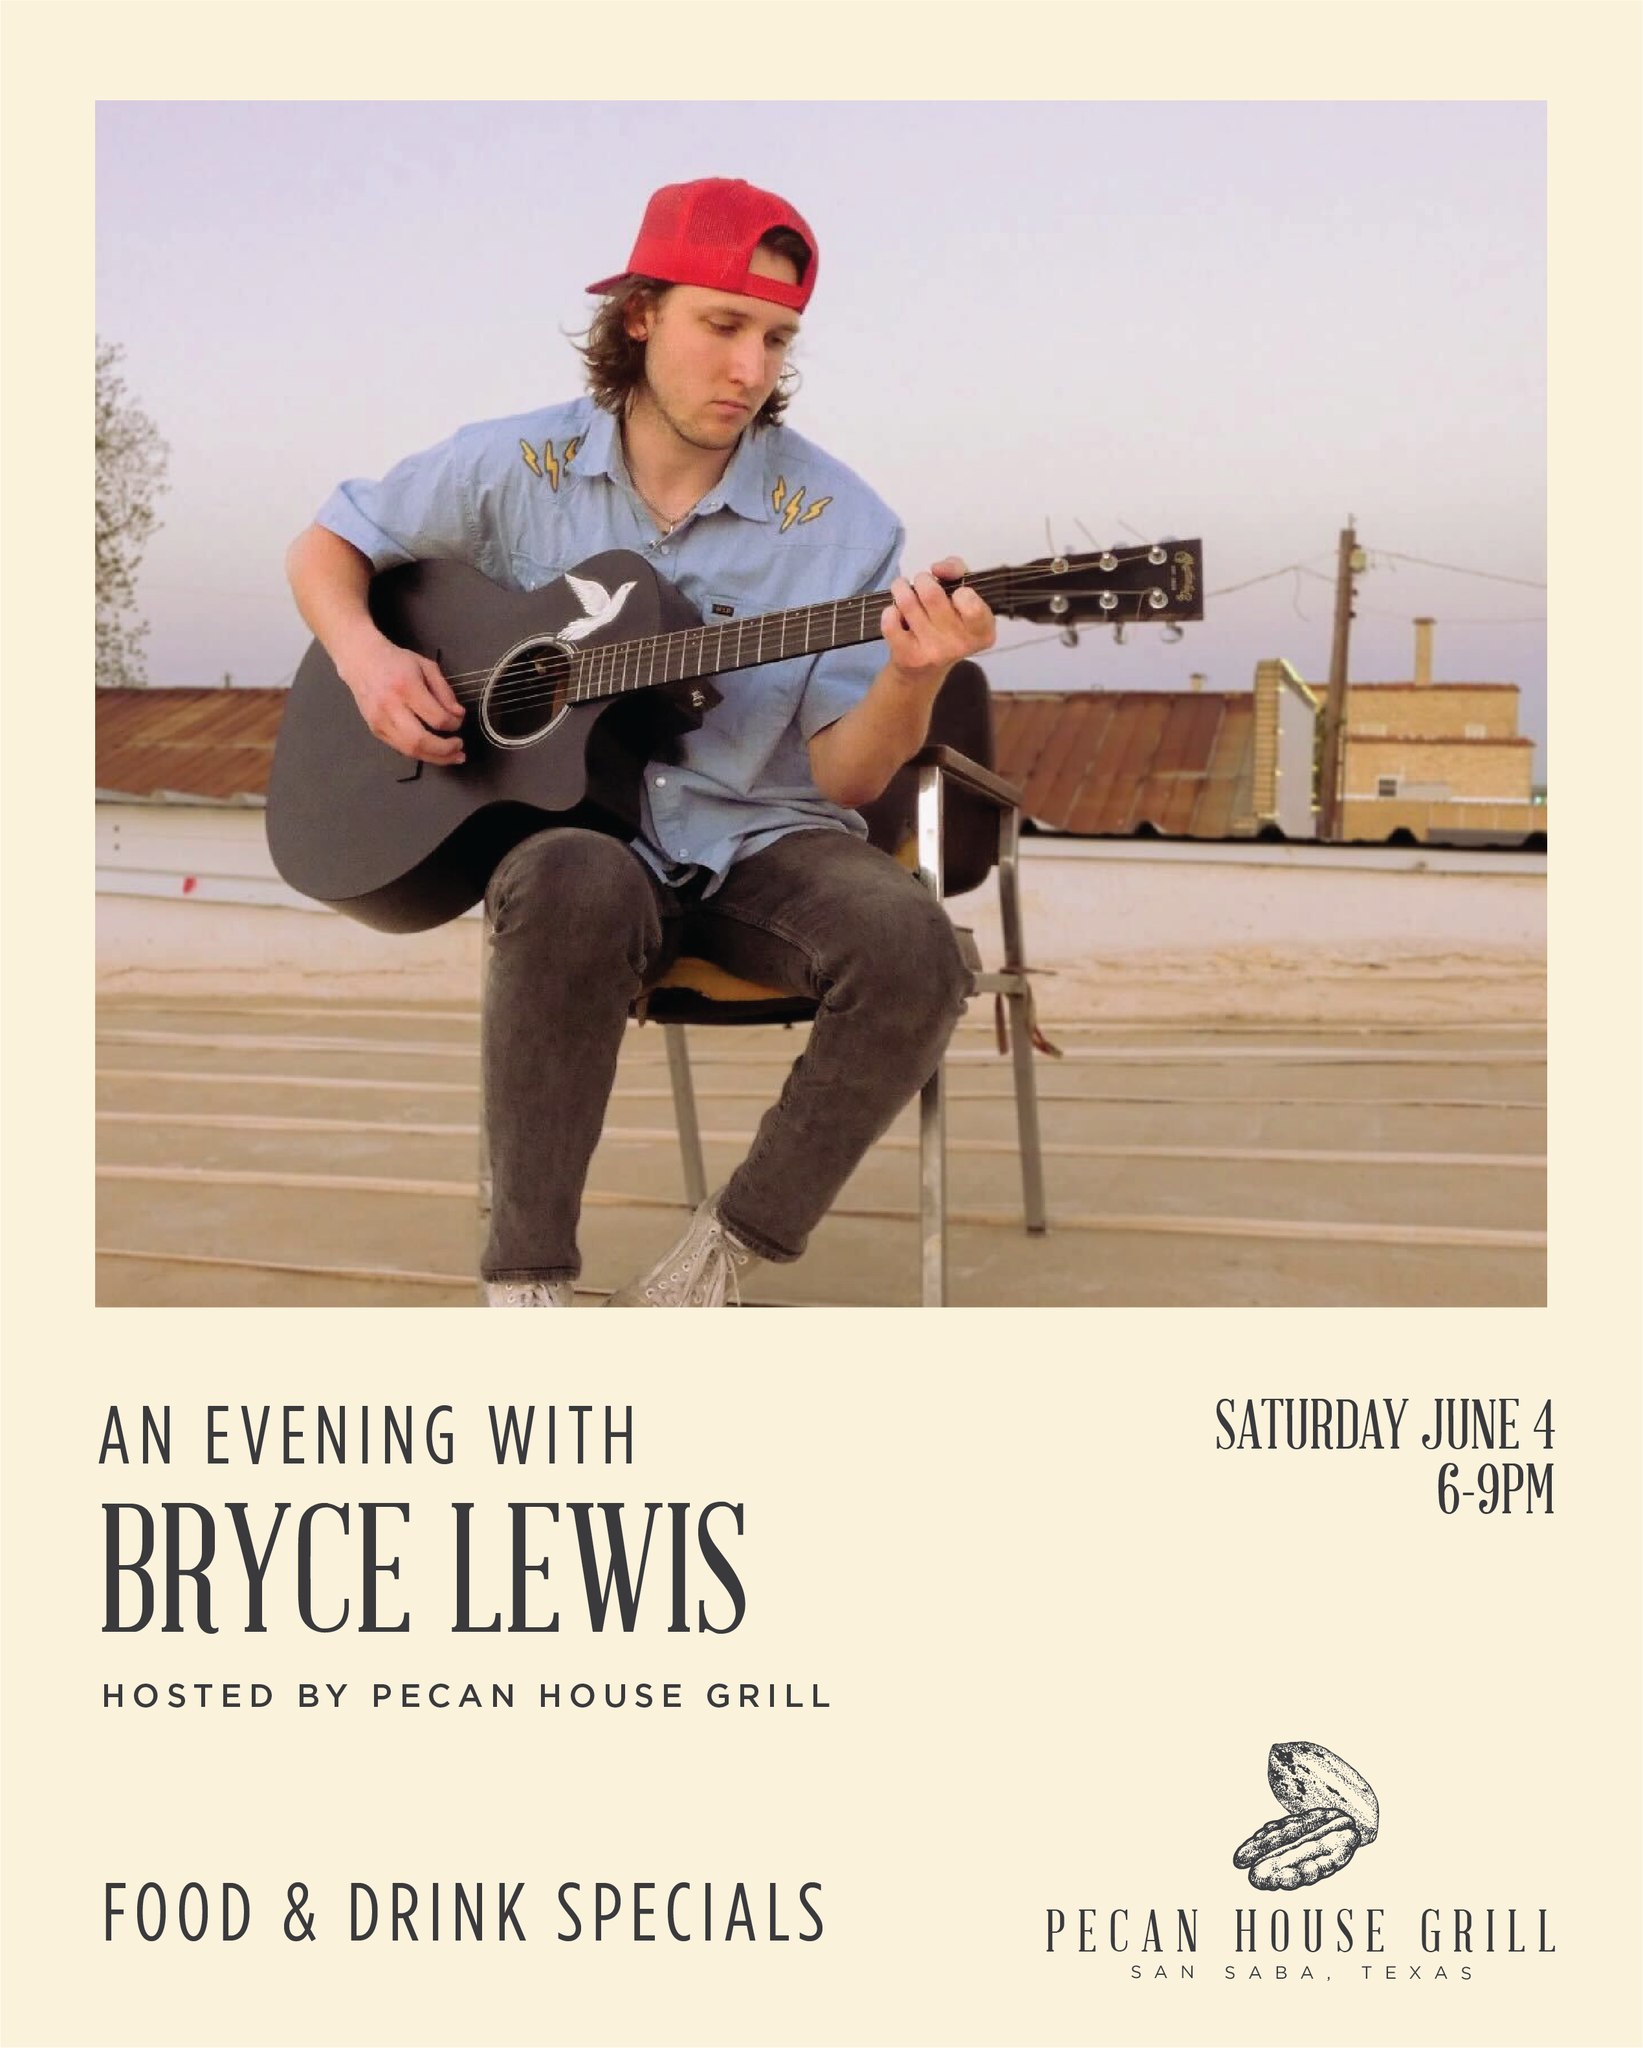 An Evening with Bryce Lewis at Pecan House Grill on 06-04-2022